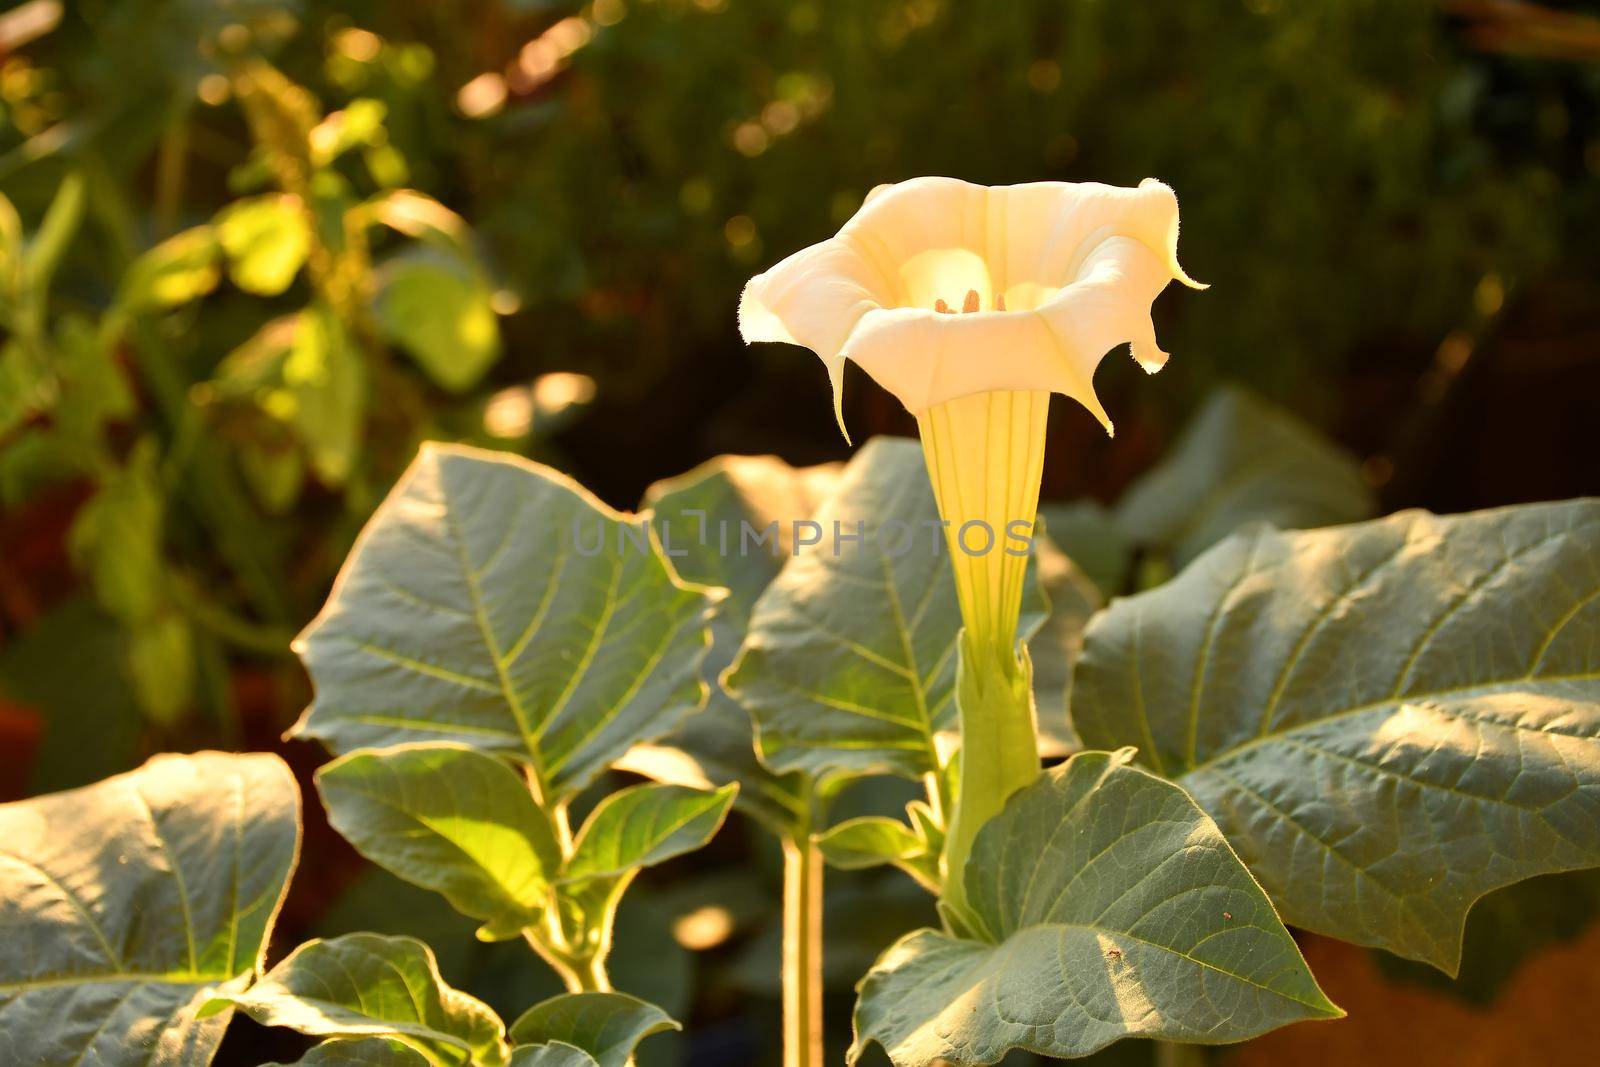 thorn apple with white flower in morning sun by Jochen